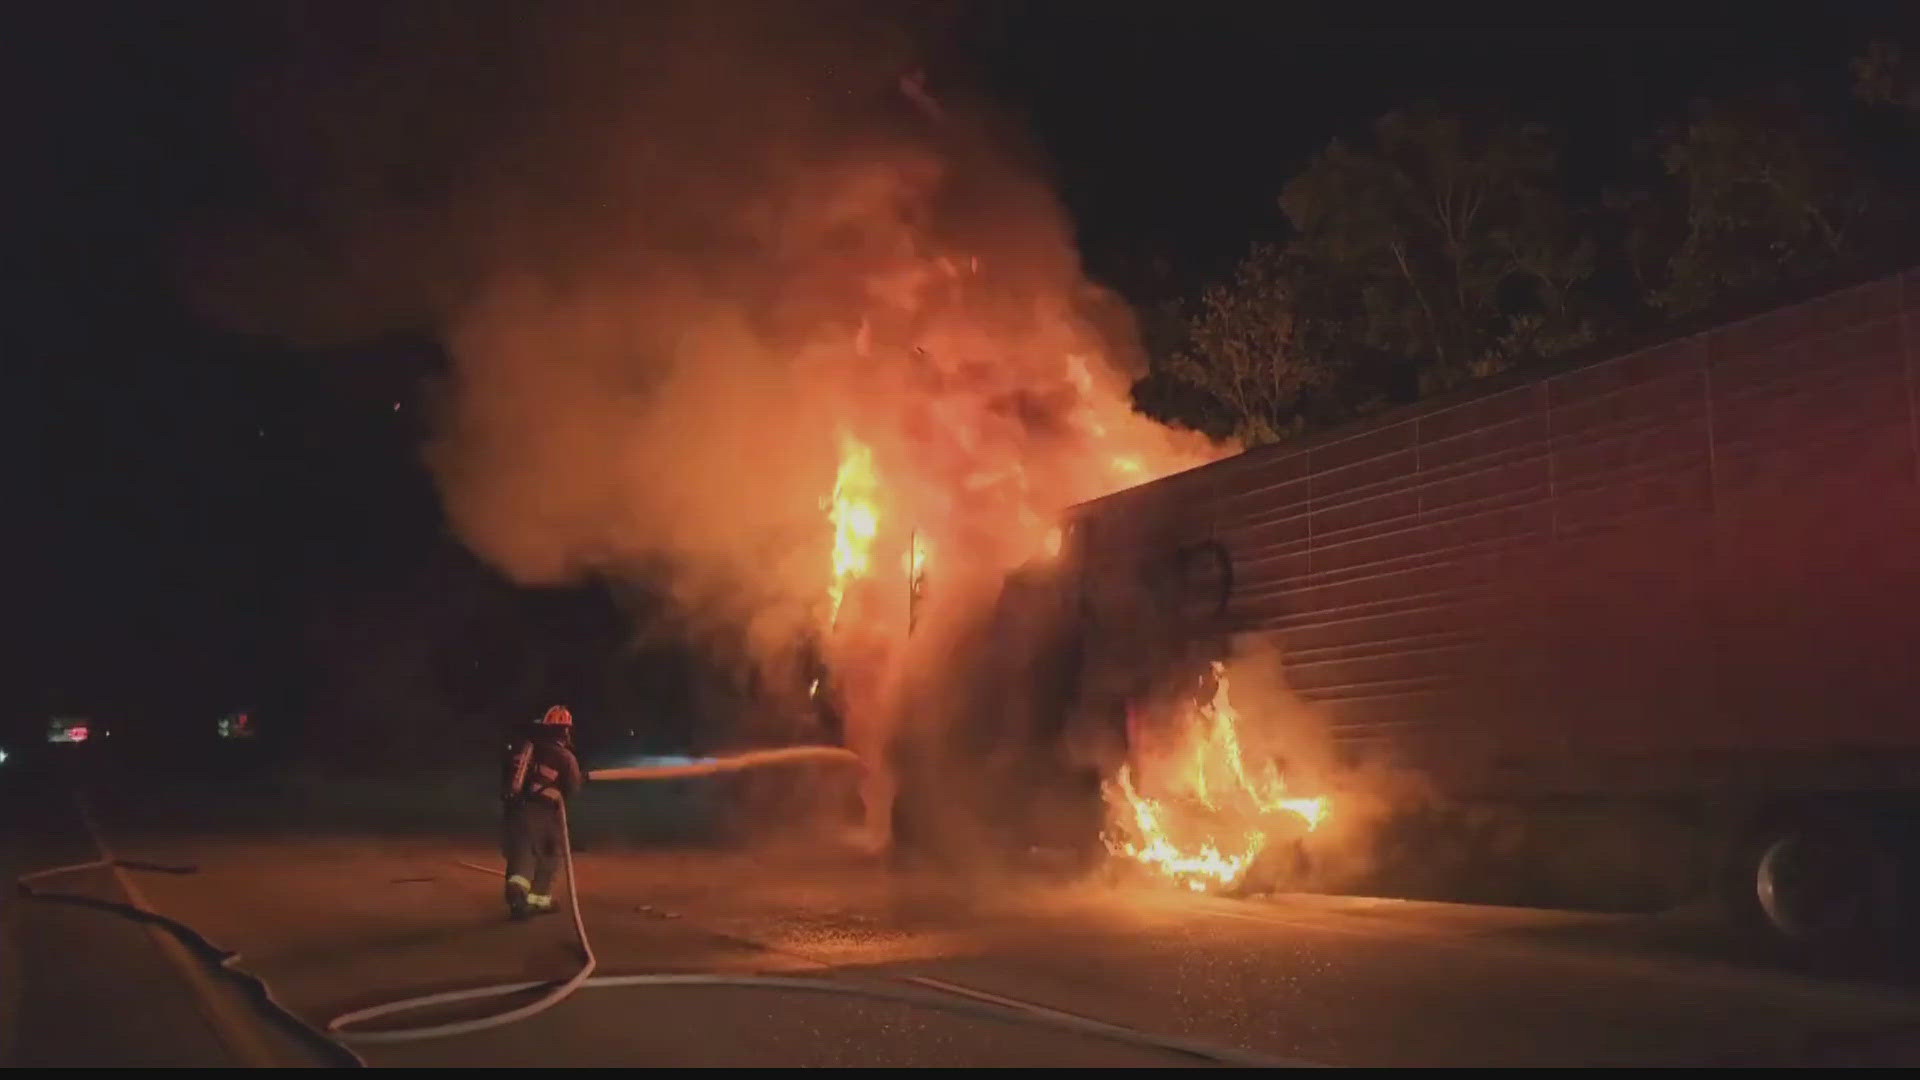 Around 9:52 p.m., crews were seen putting out the massive blaze near exit 5A. Officials said avoid the area.